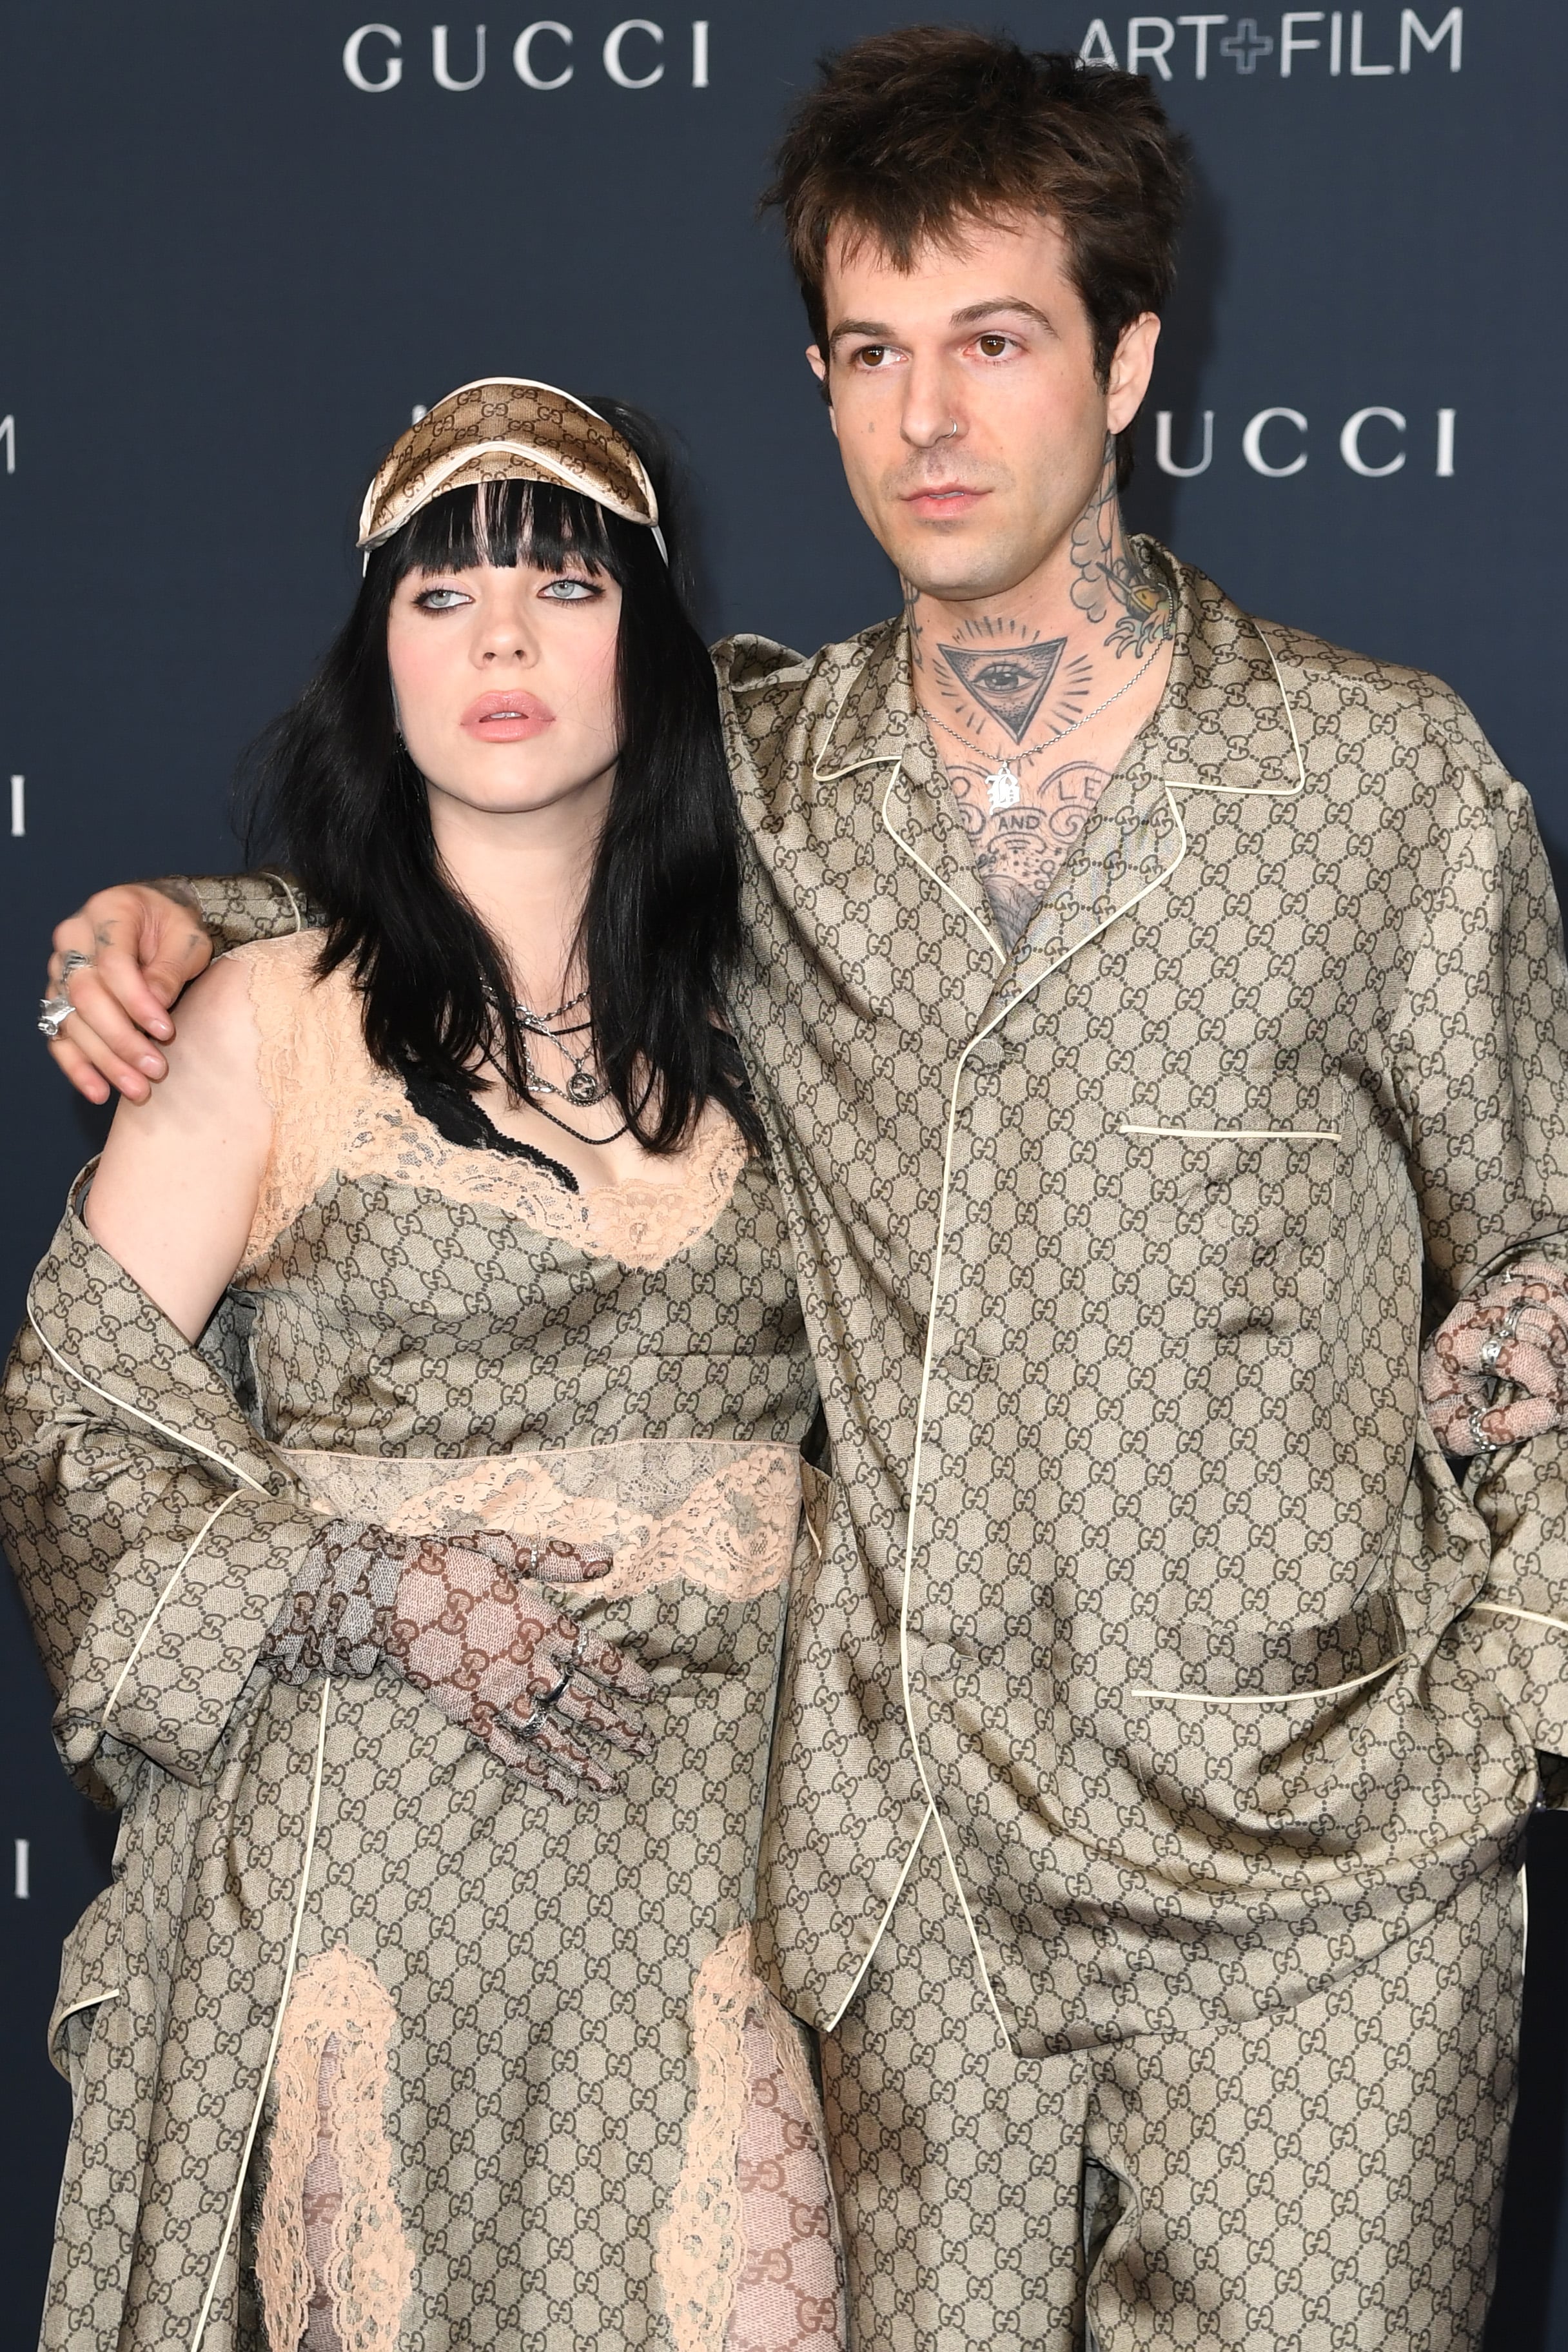 Billie Eilish Goes Undercover in Layers and Layers of Gucci Logos